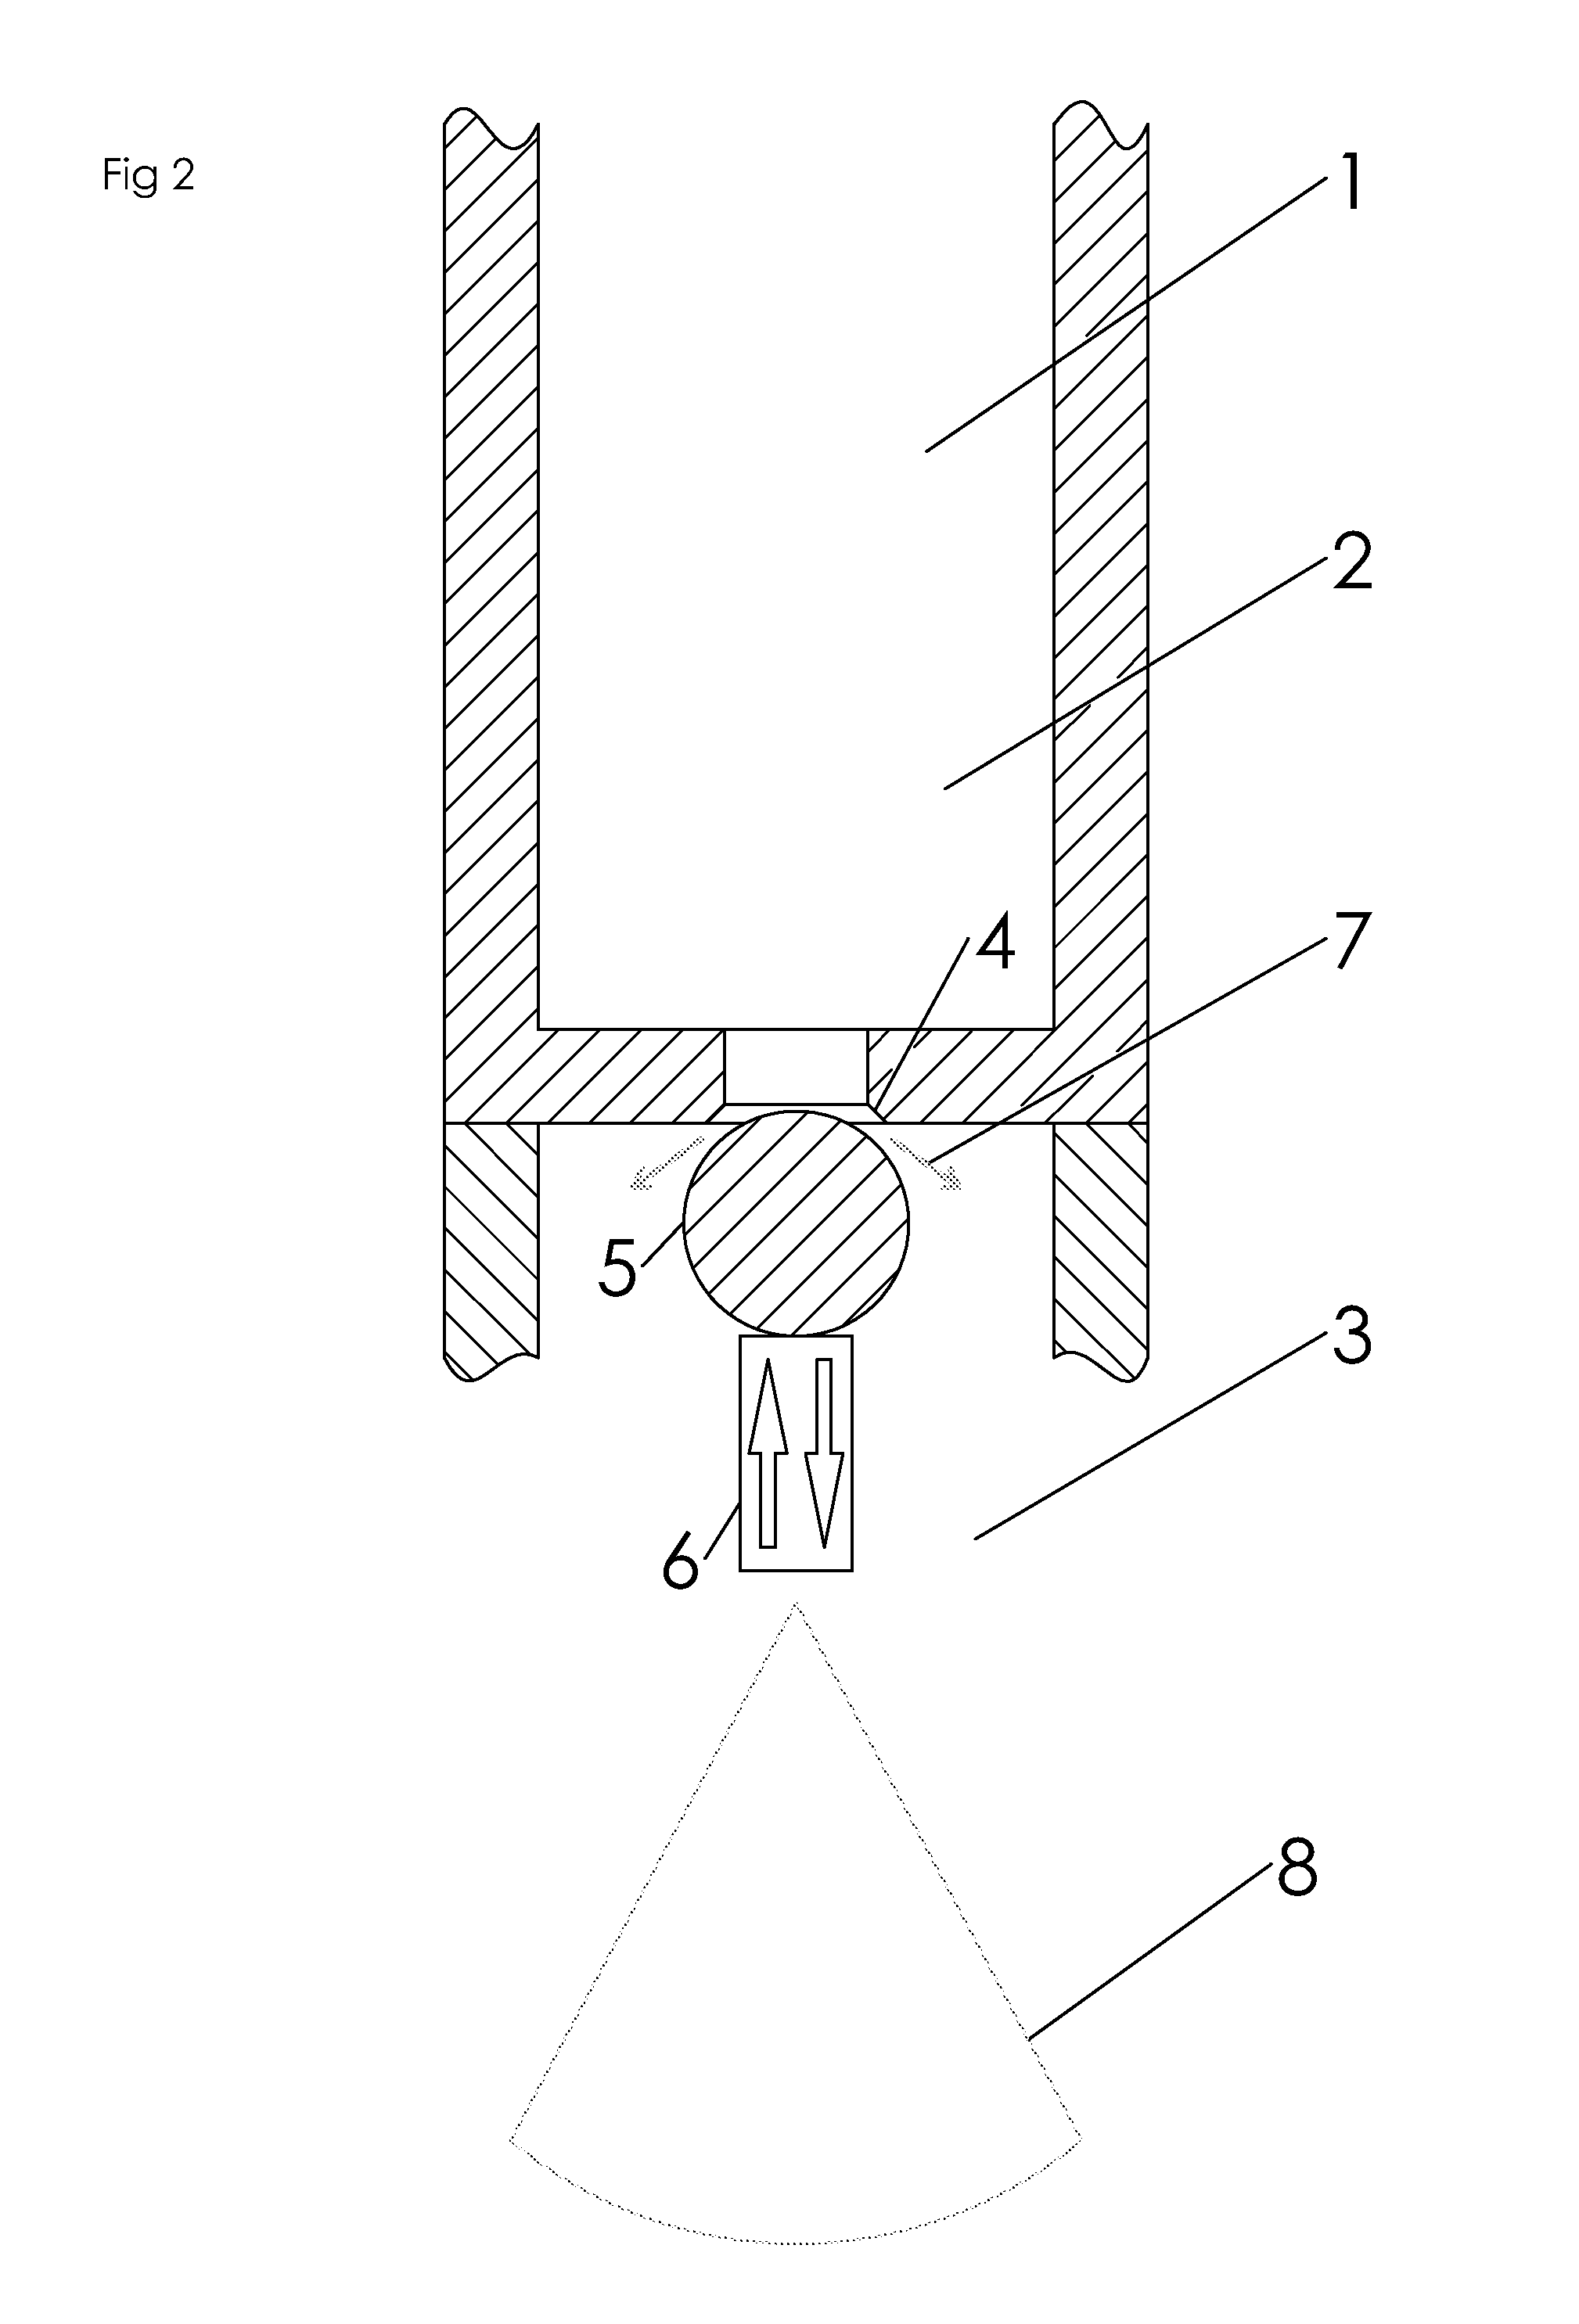 Electronically-controlled, high pressure flow control valve and method of use